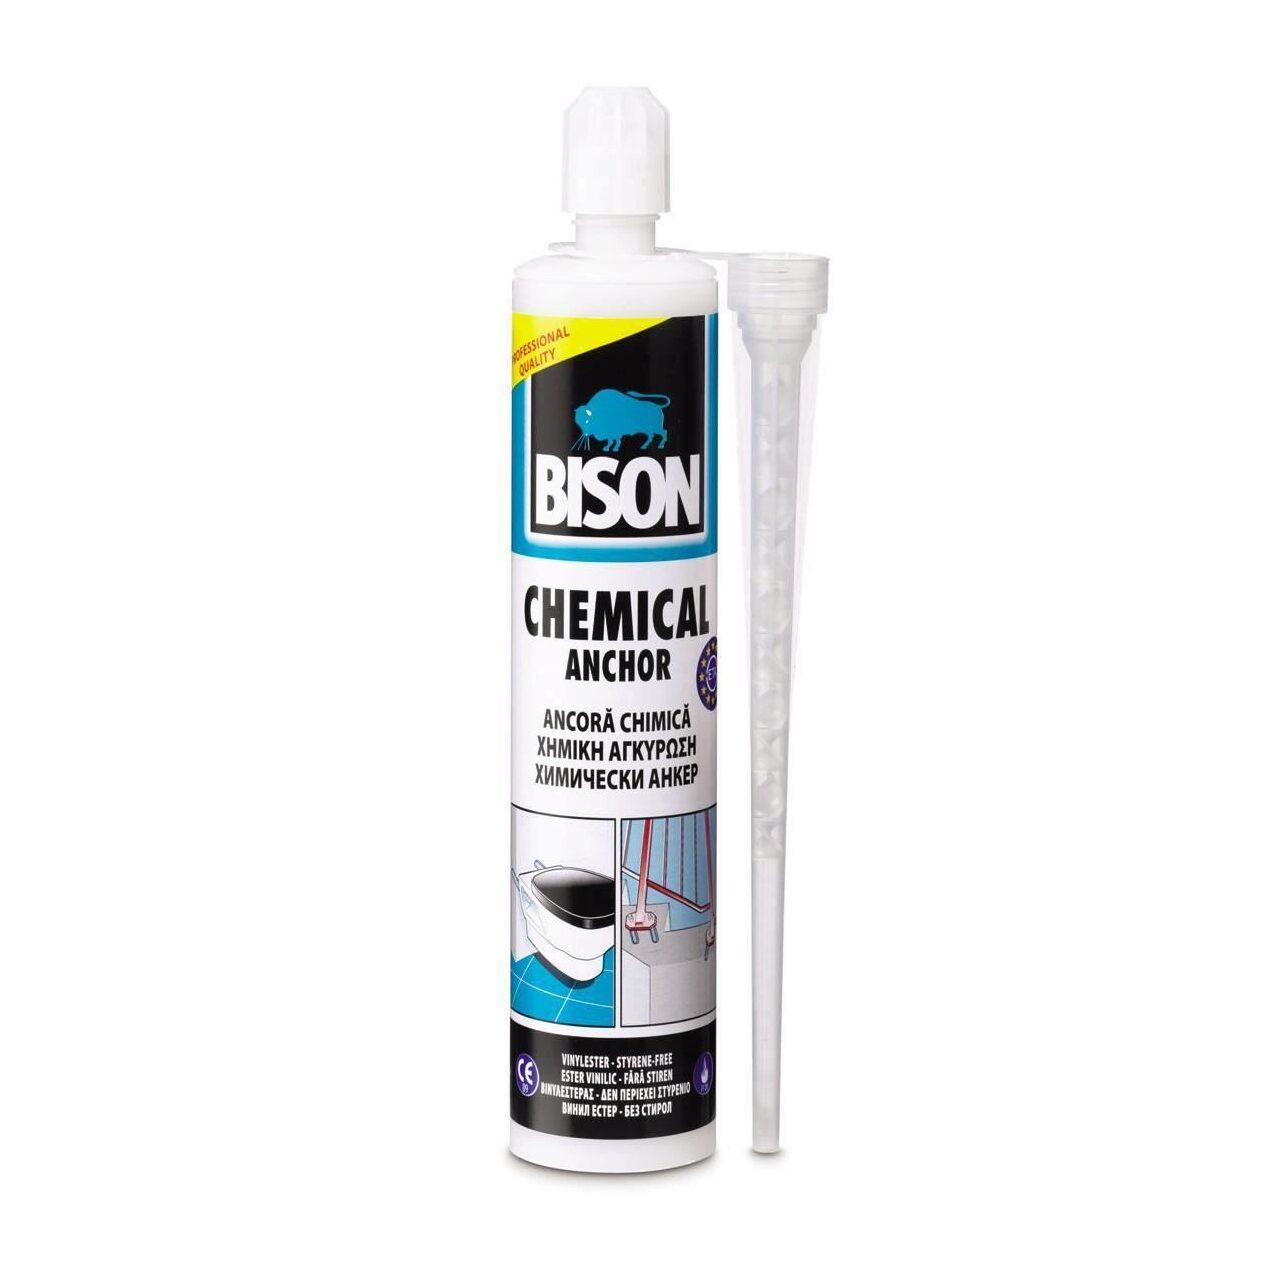 Ancora chimica BISON Chemical Anchor, 300ml